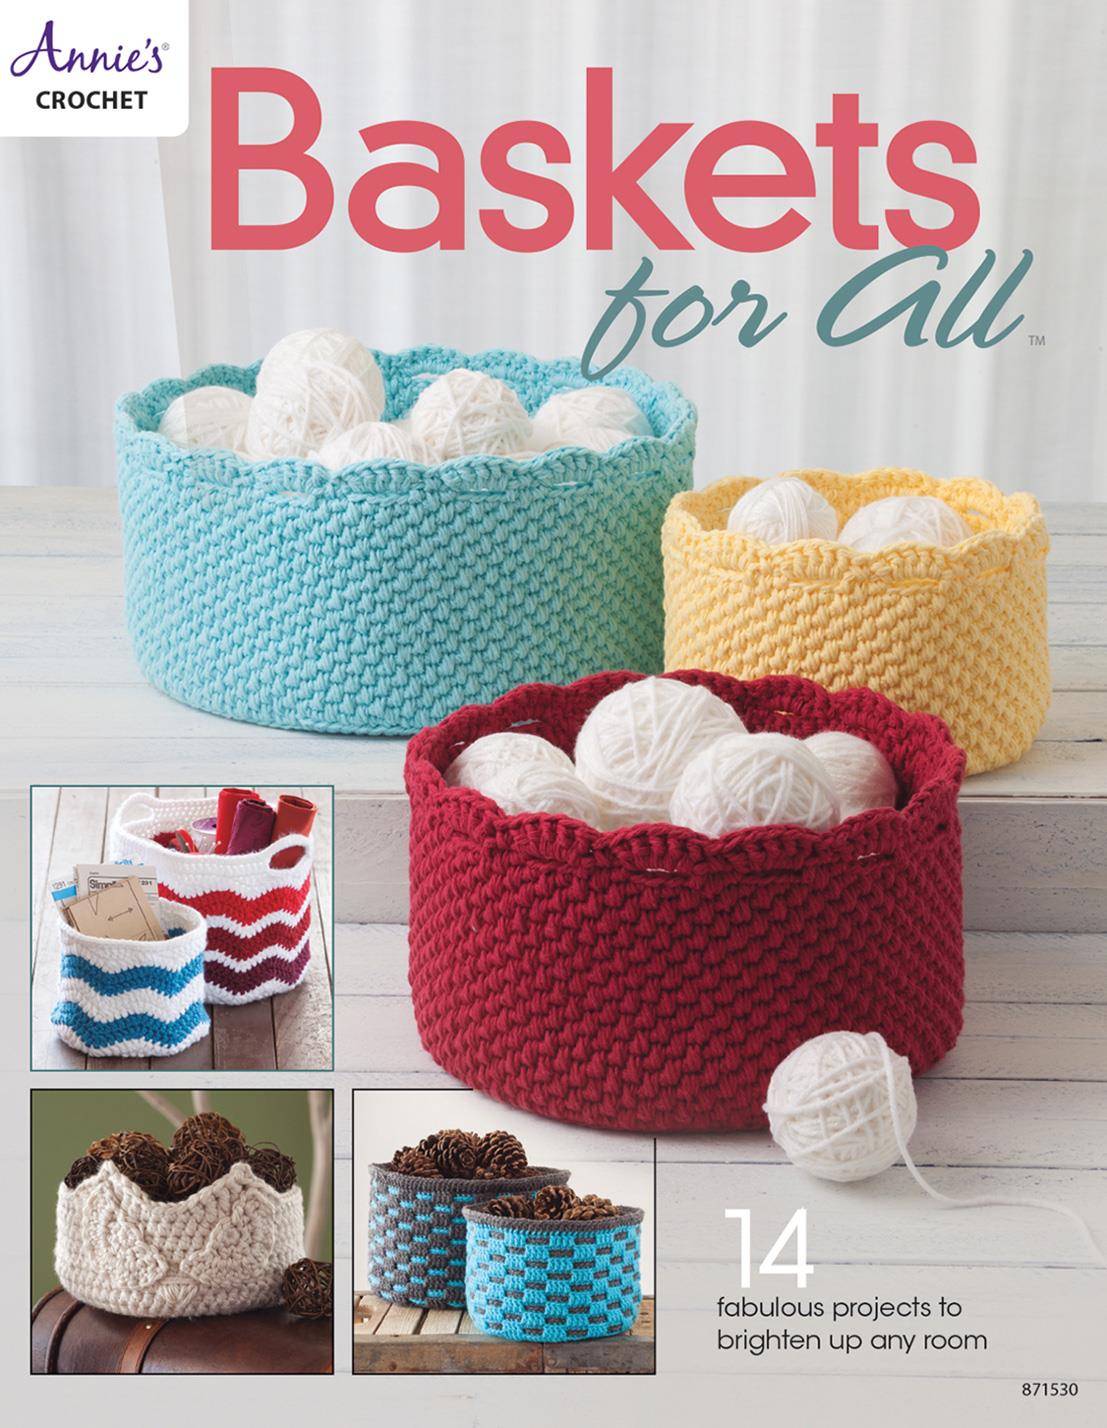 Baskets for All - 14 Fabulous Projects Pattern Book by Annie's